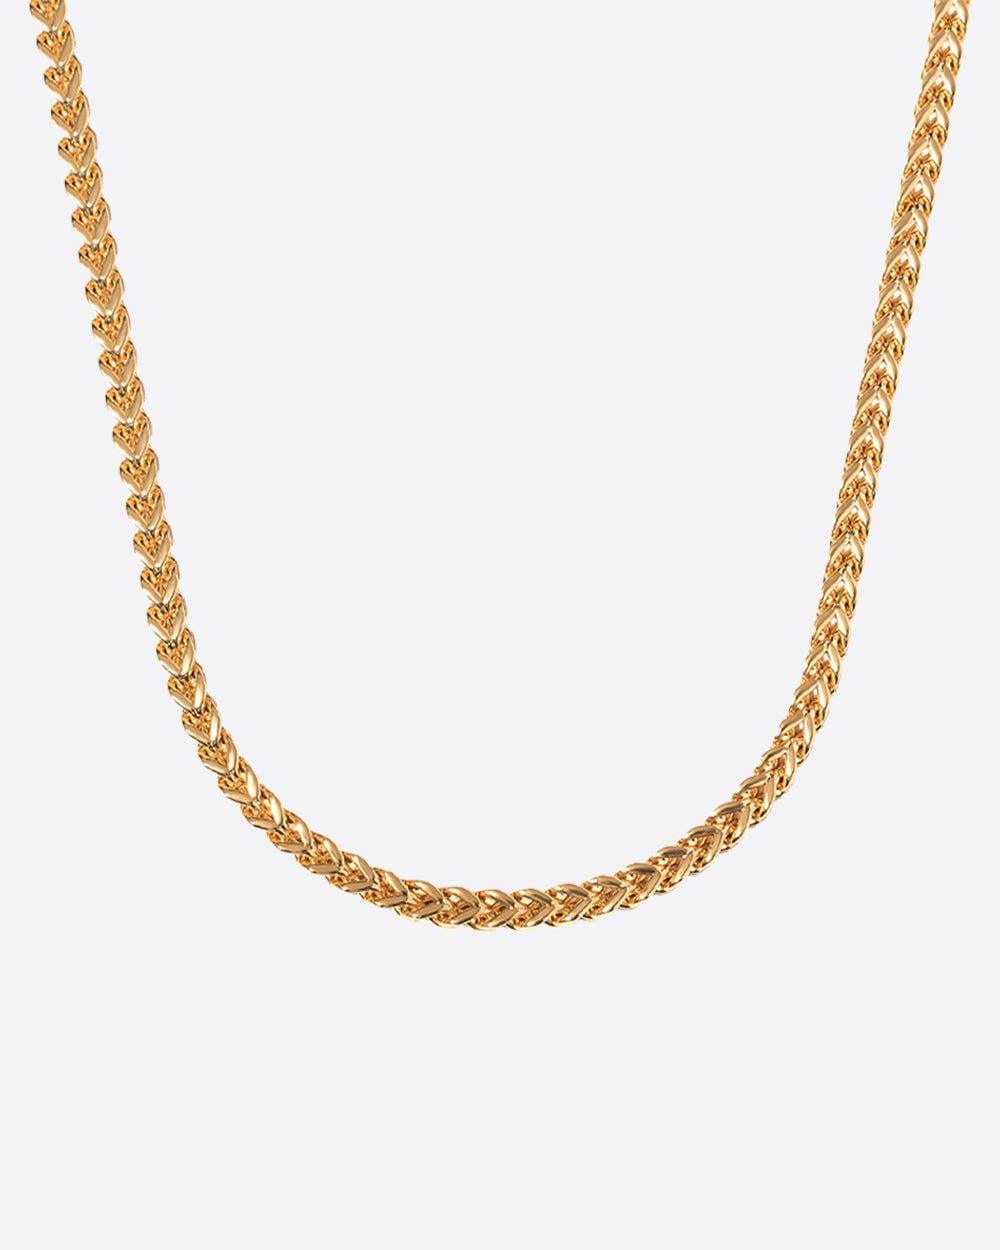 CLEAN FRANCO CHAIN. - 3MM 18K GOLD - DRIP IN THE JEWEL